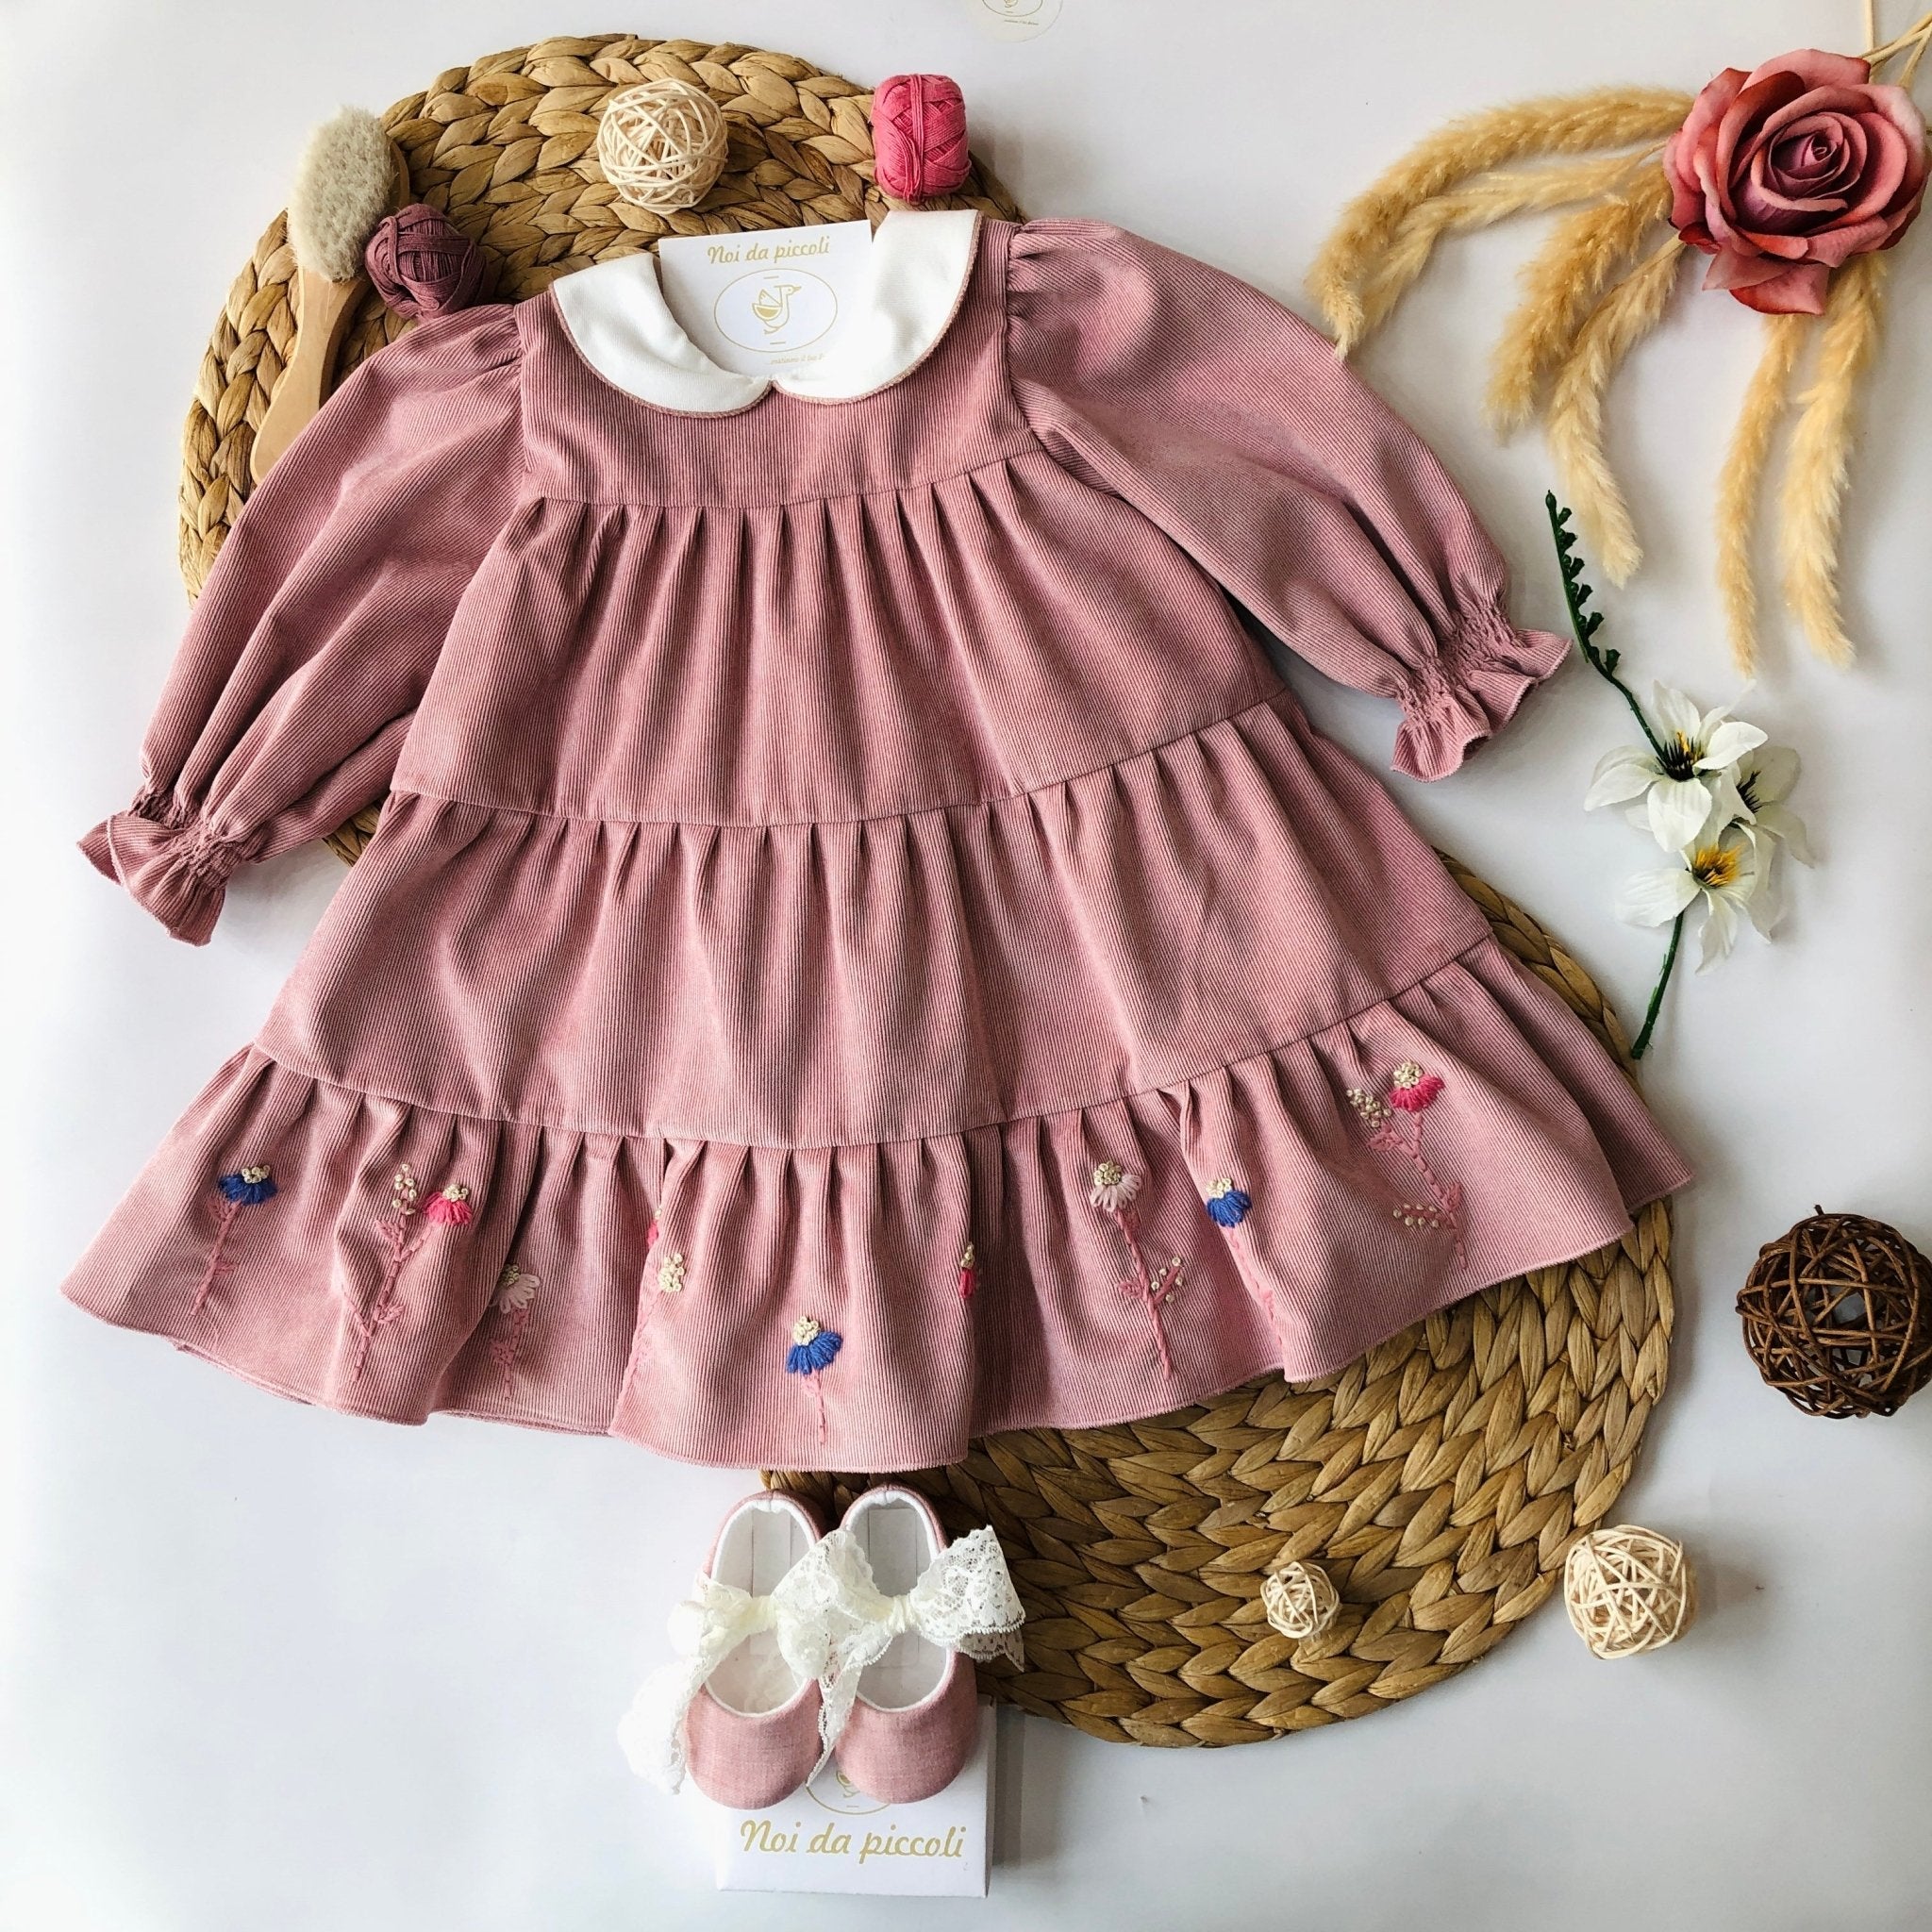 OLD PINK VELVET DRESS WITH EMBROIDERED FLOWERS